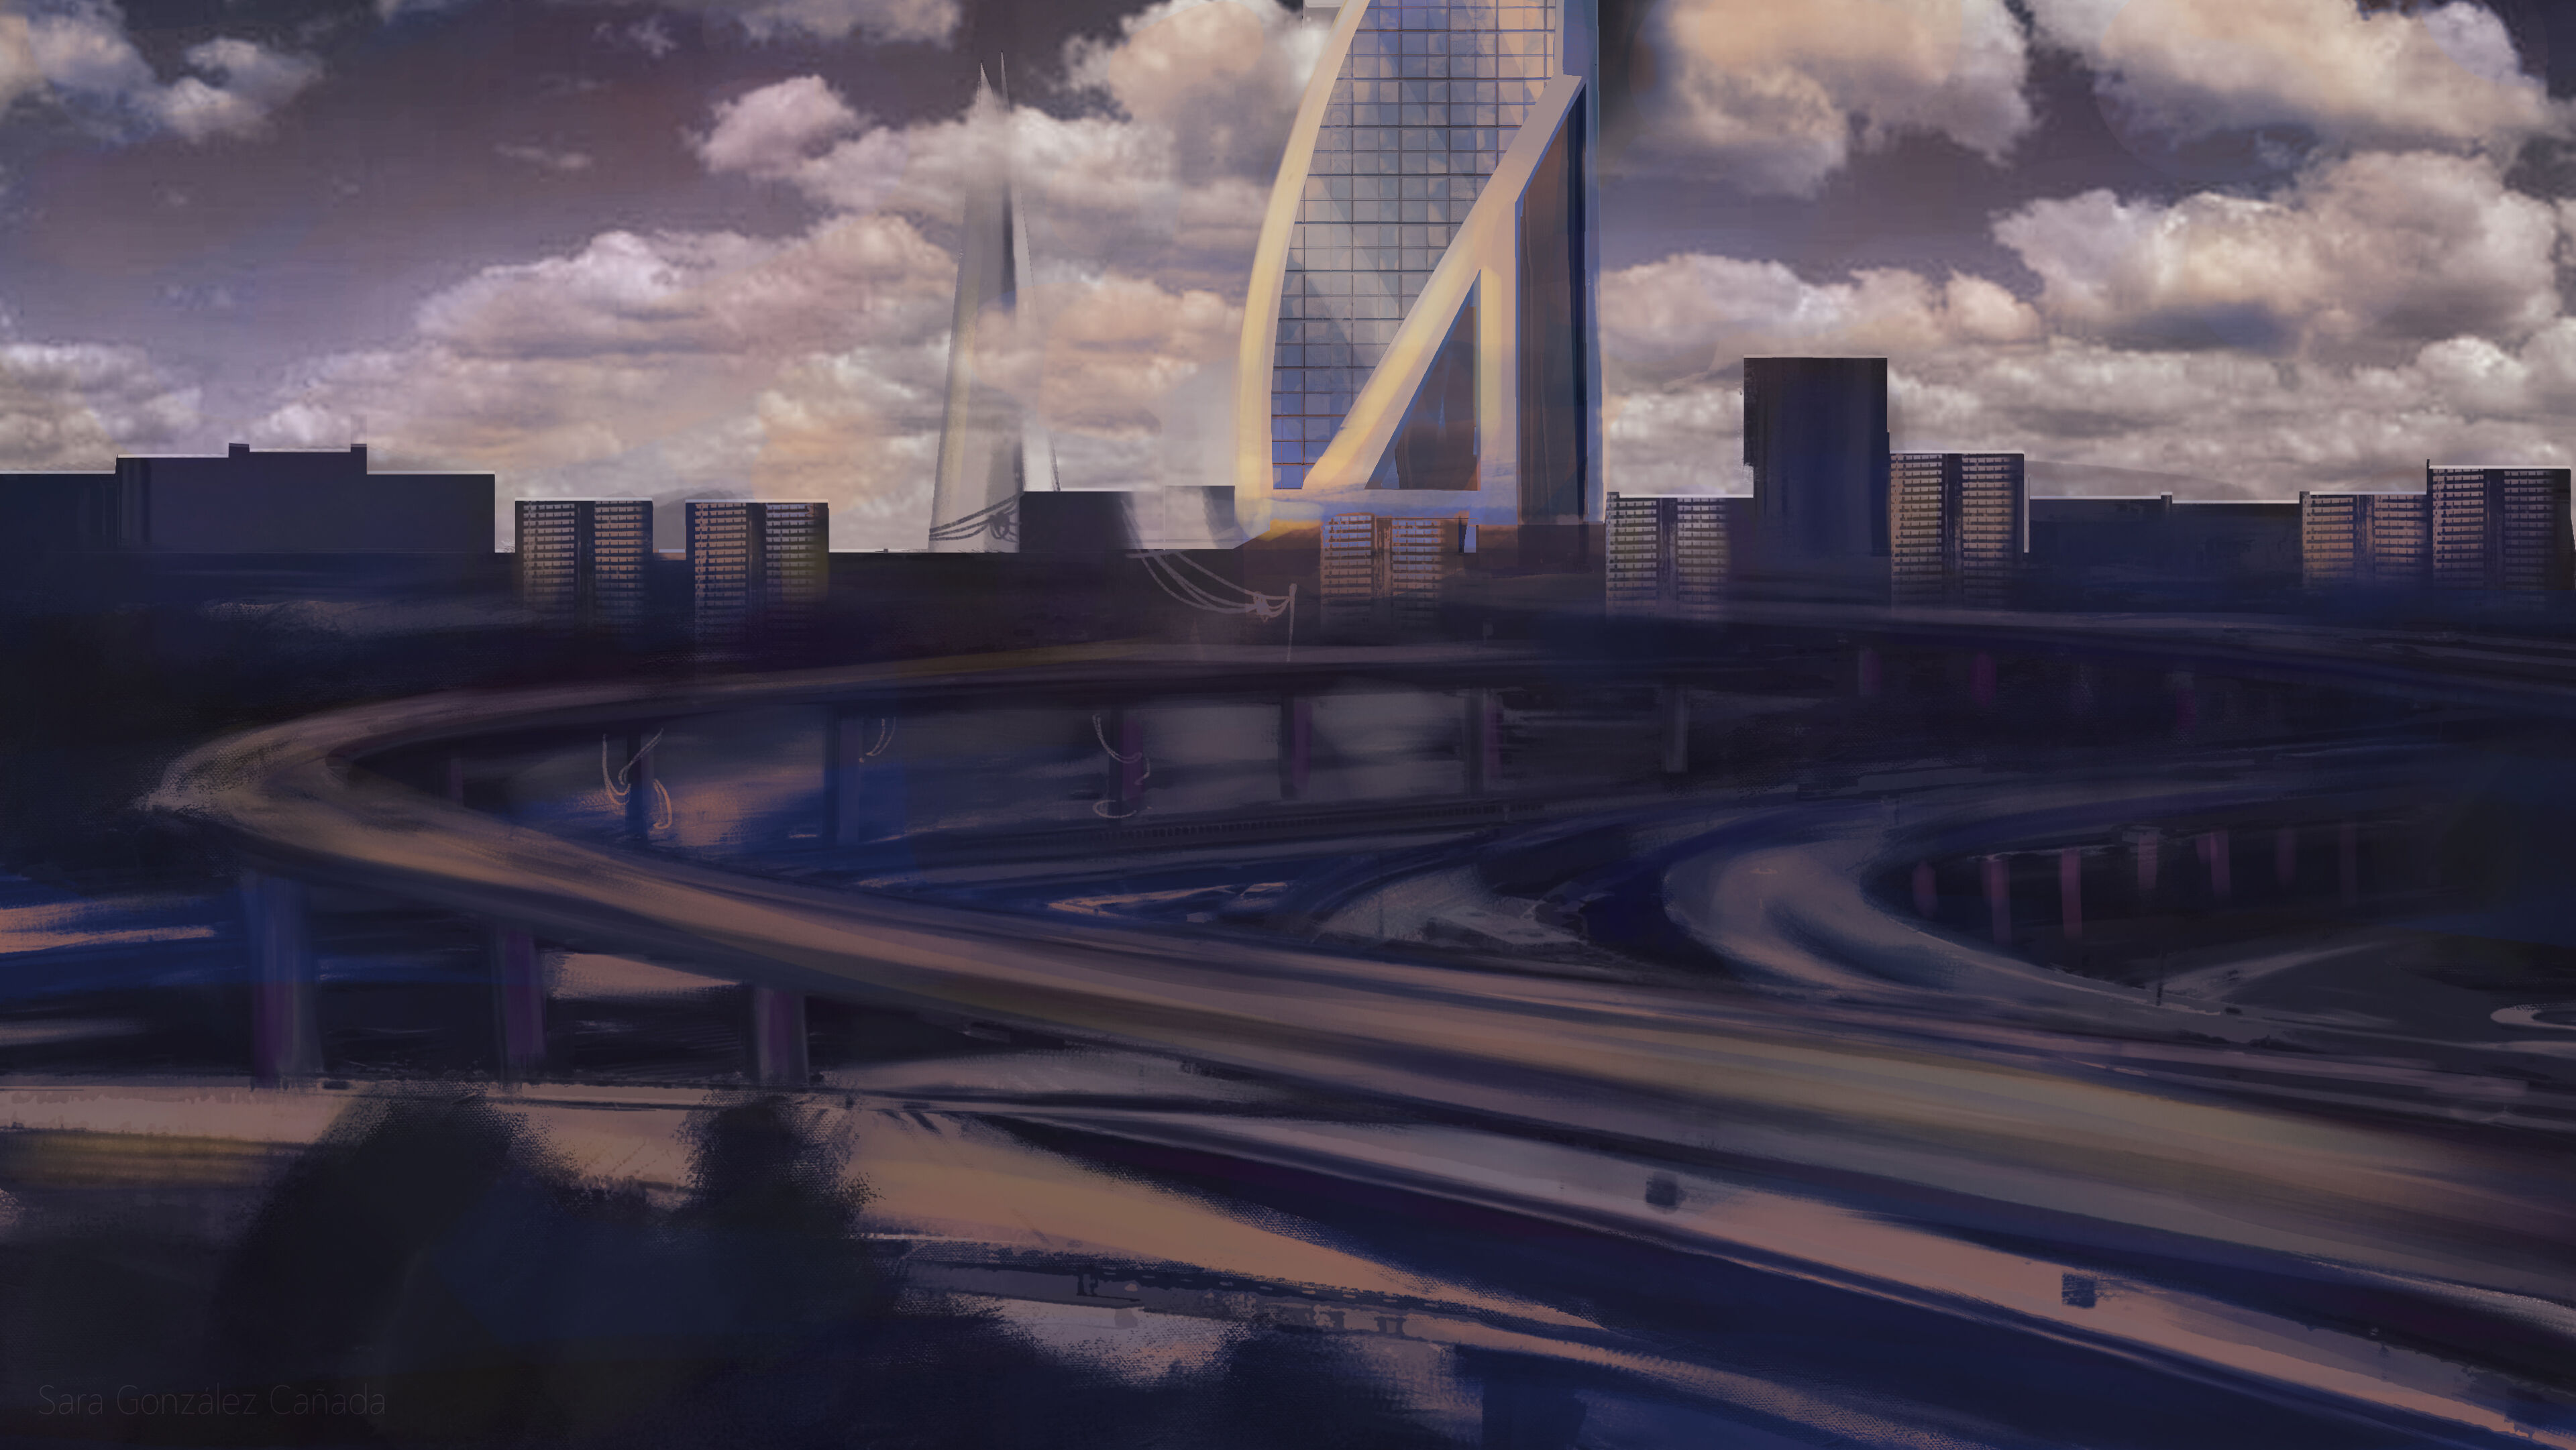 An artistic depiction of a futuristic city at twilight with illuminated roads and a prominent skyscraper.